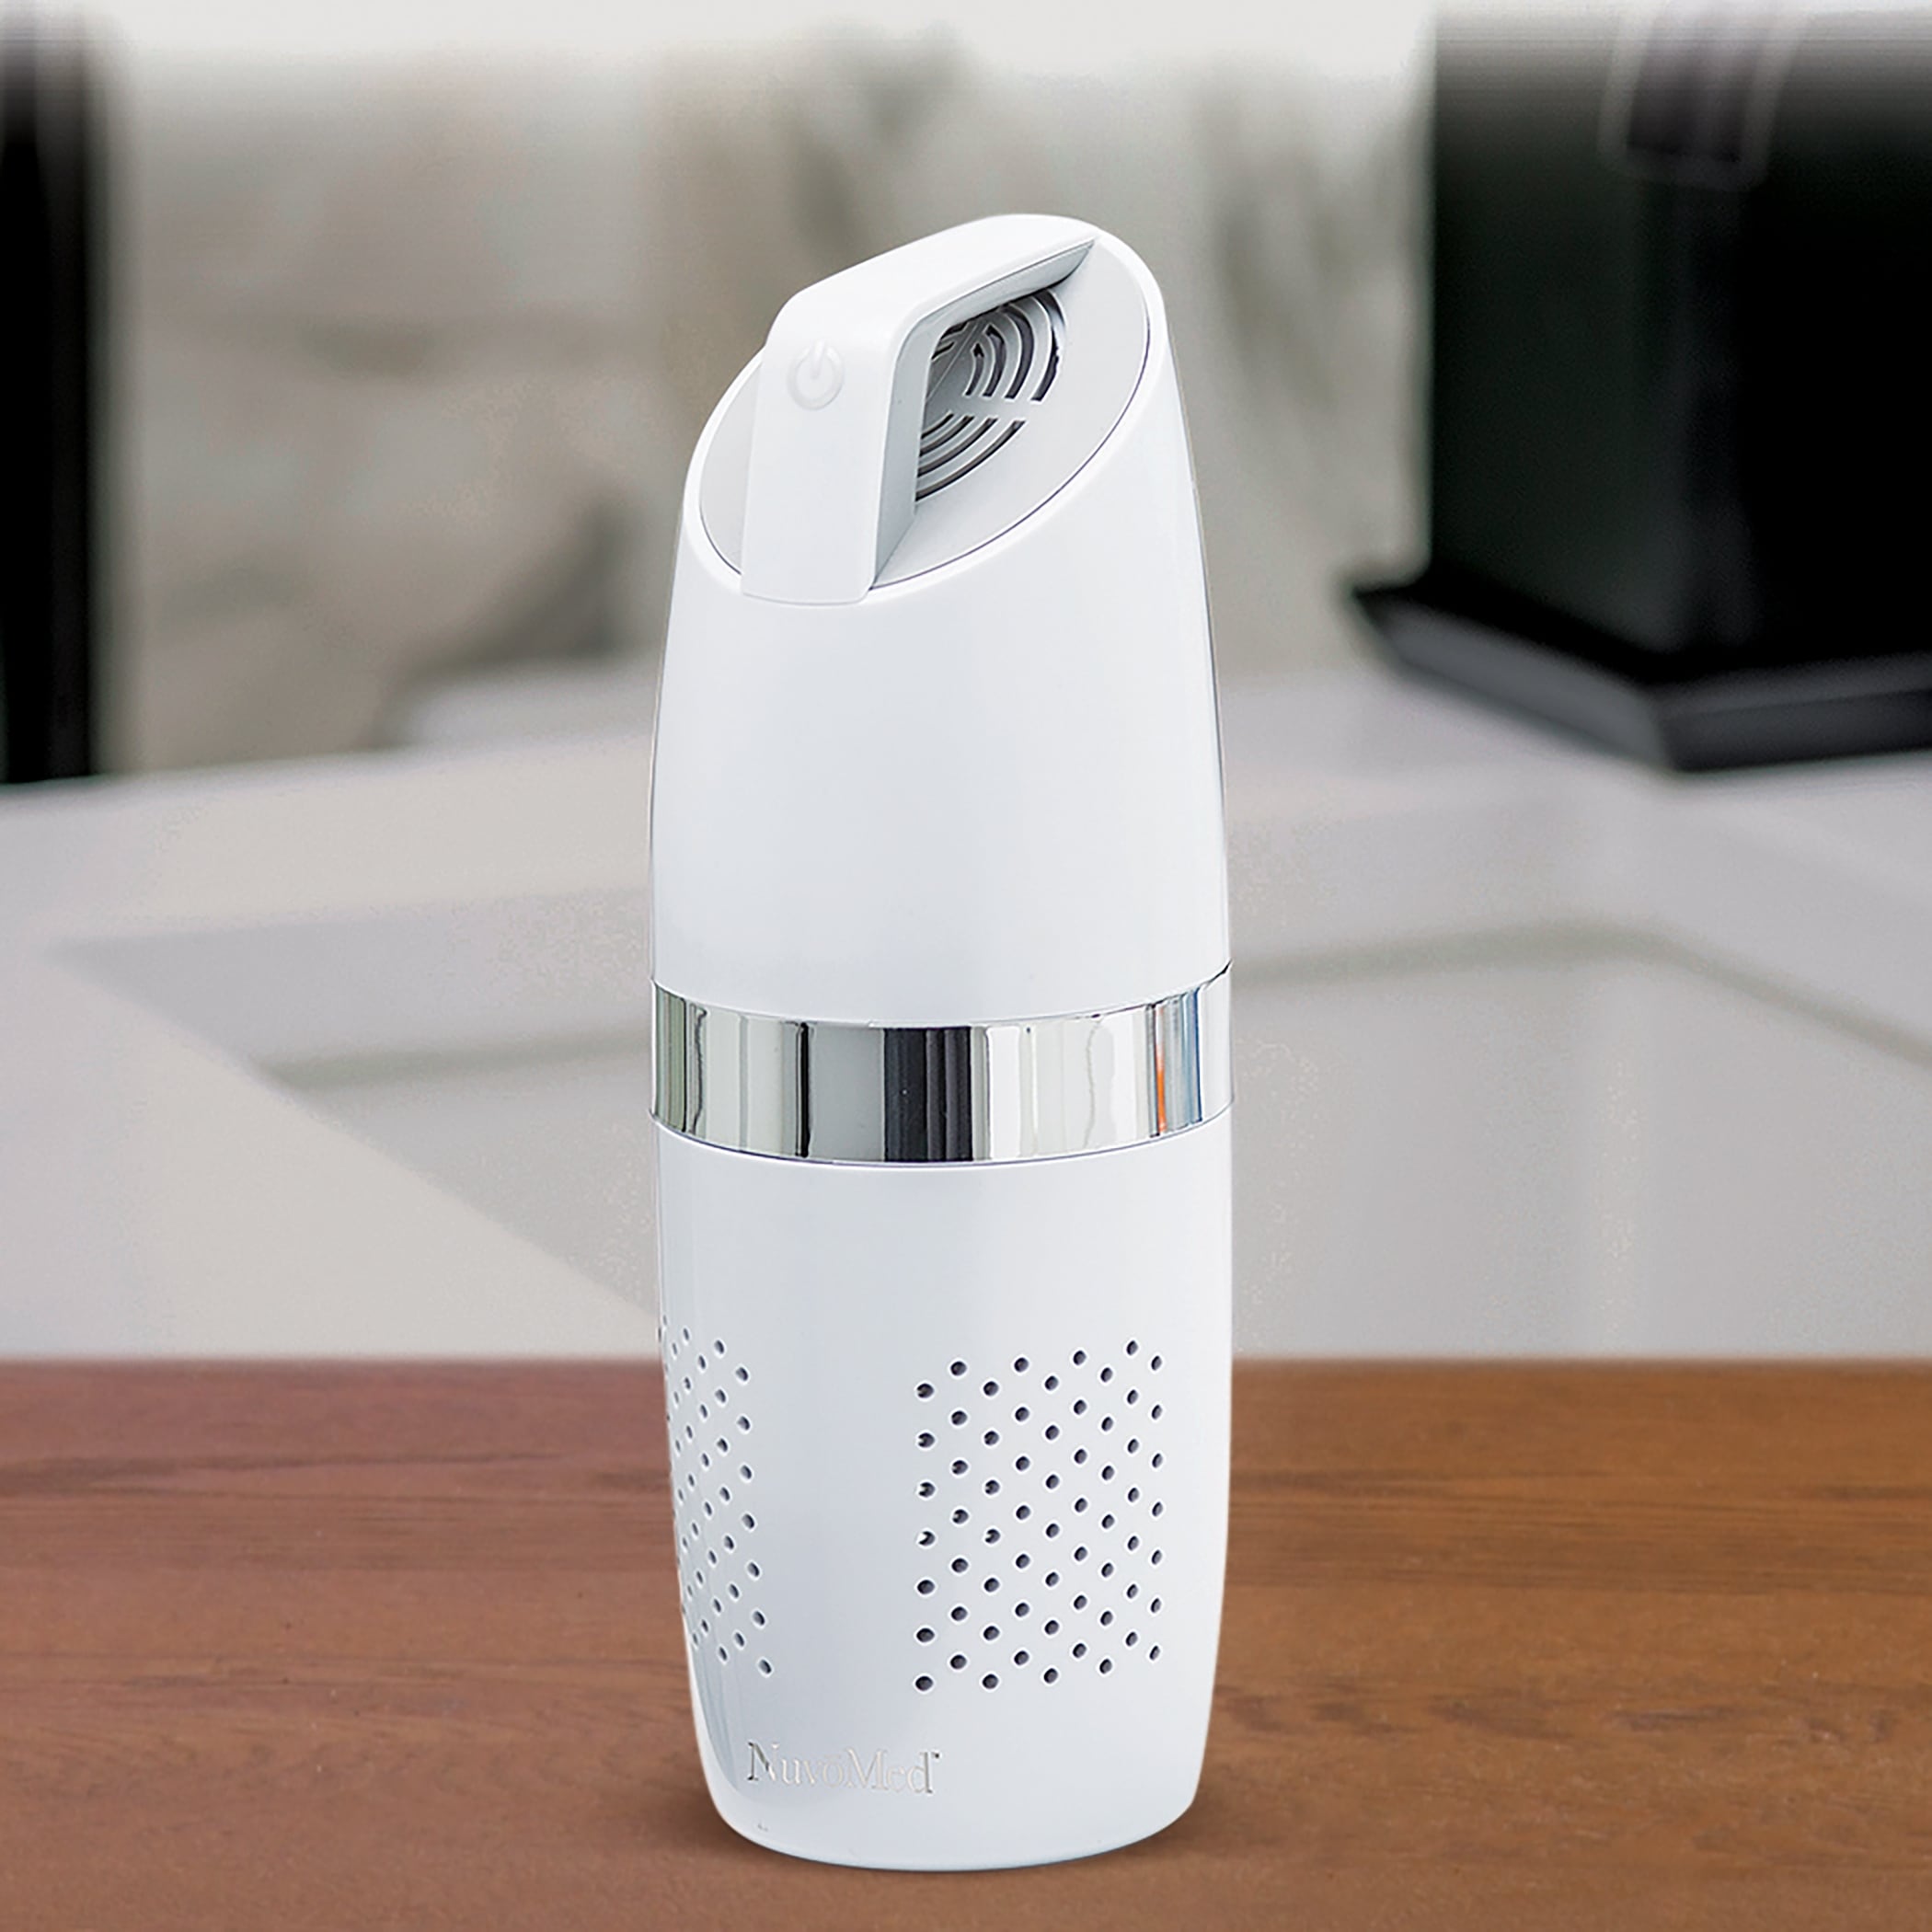 Compact Portable Air Purifier with HEPA Filter - 1...